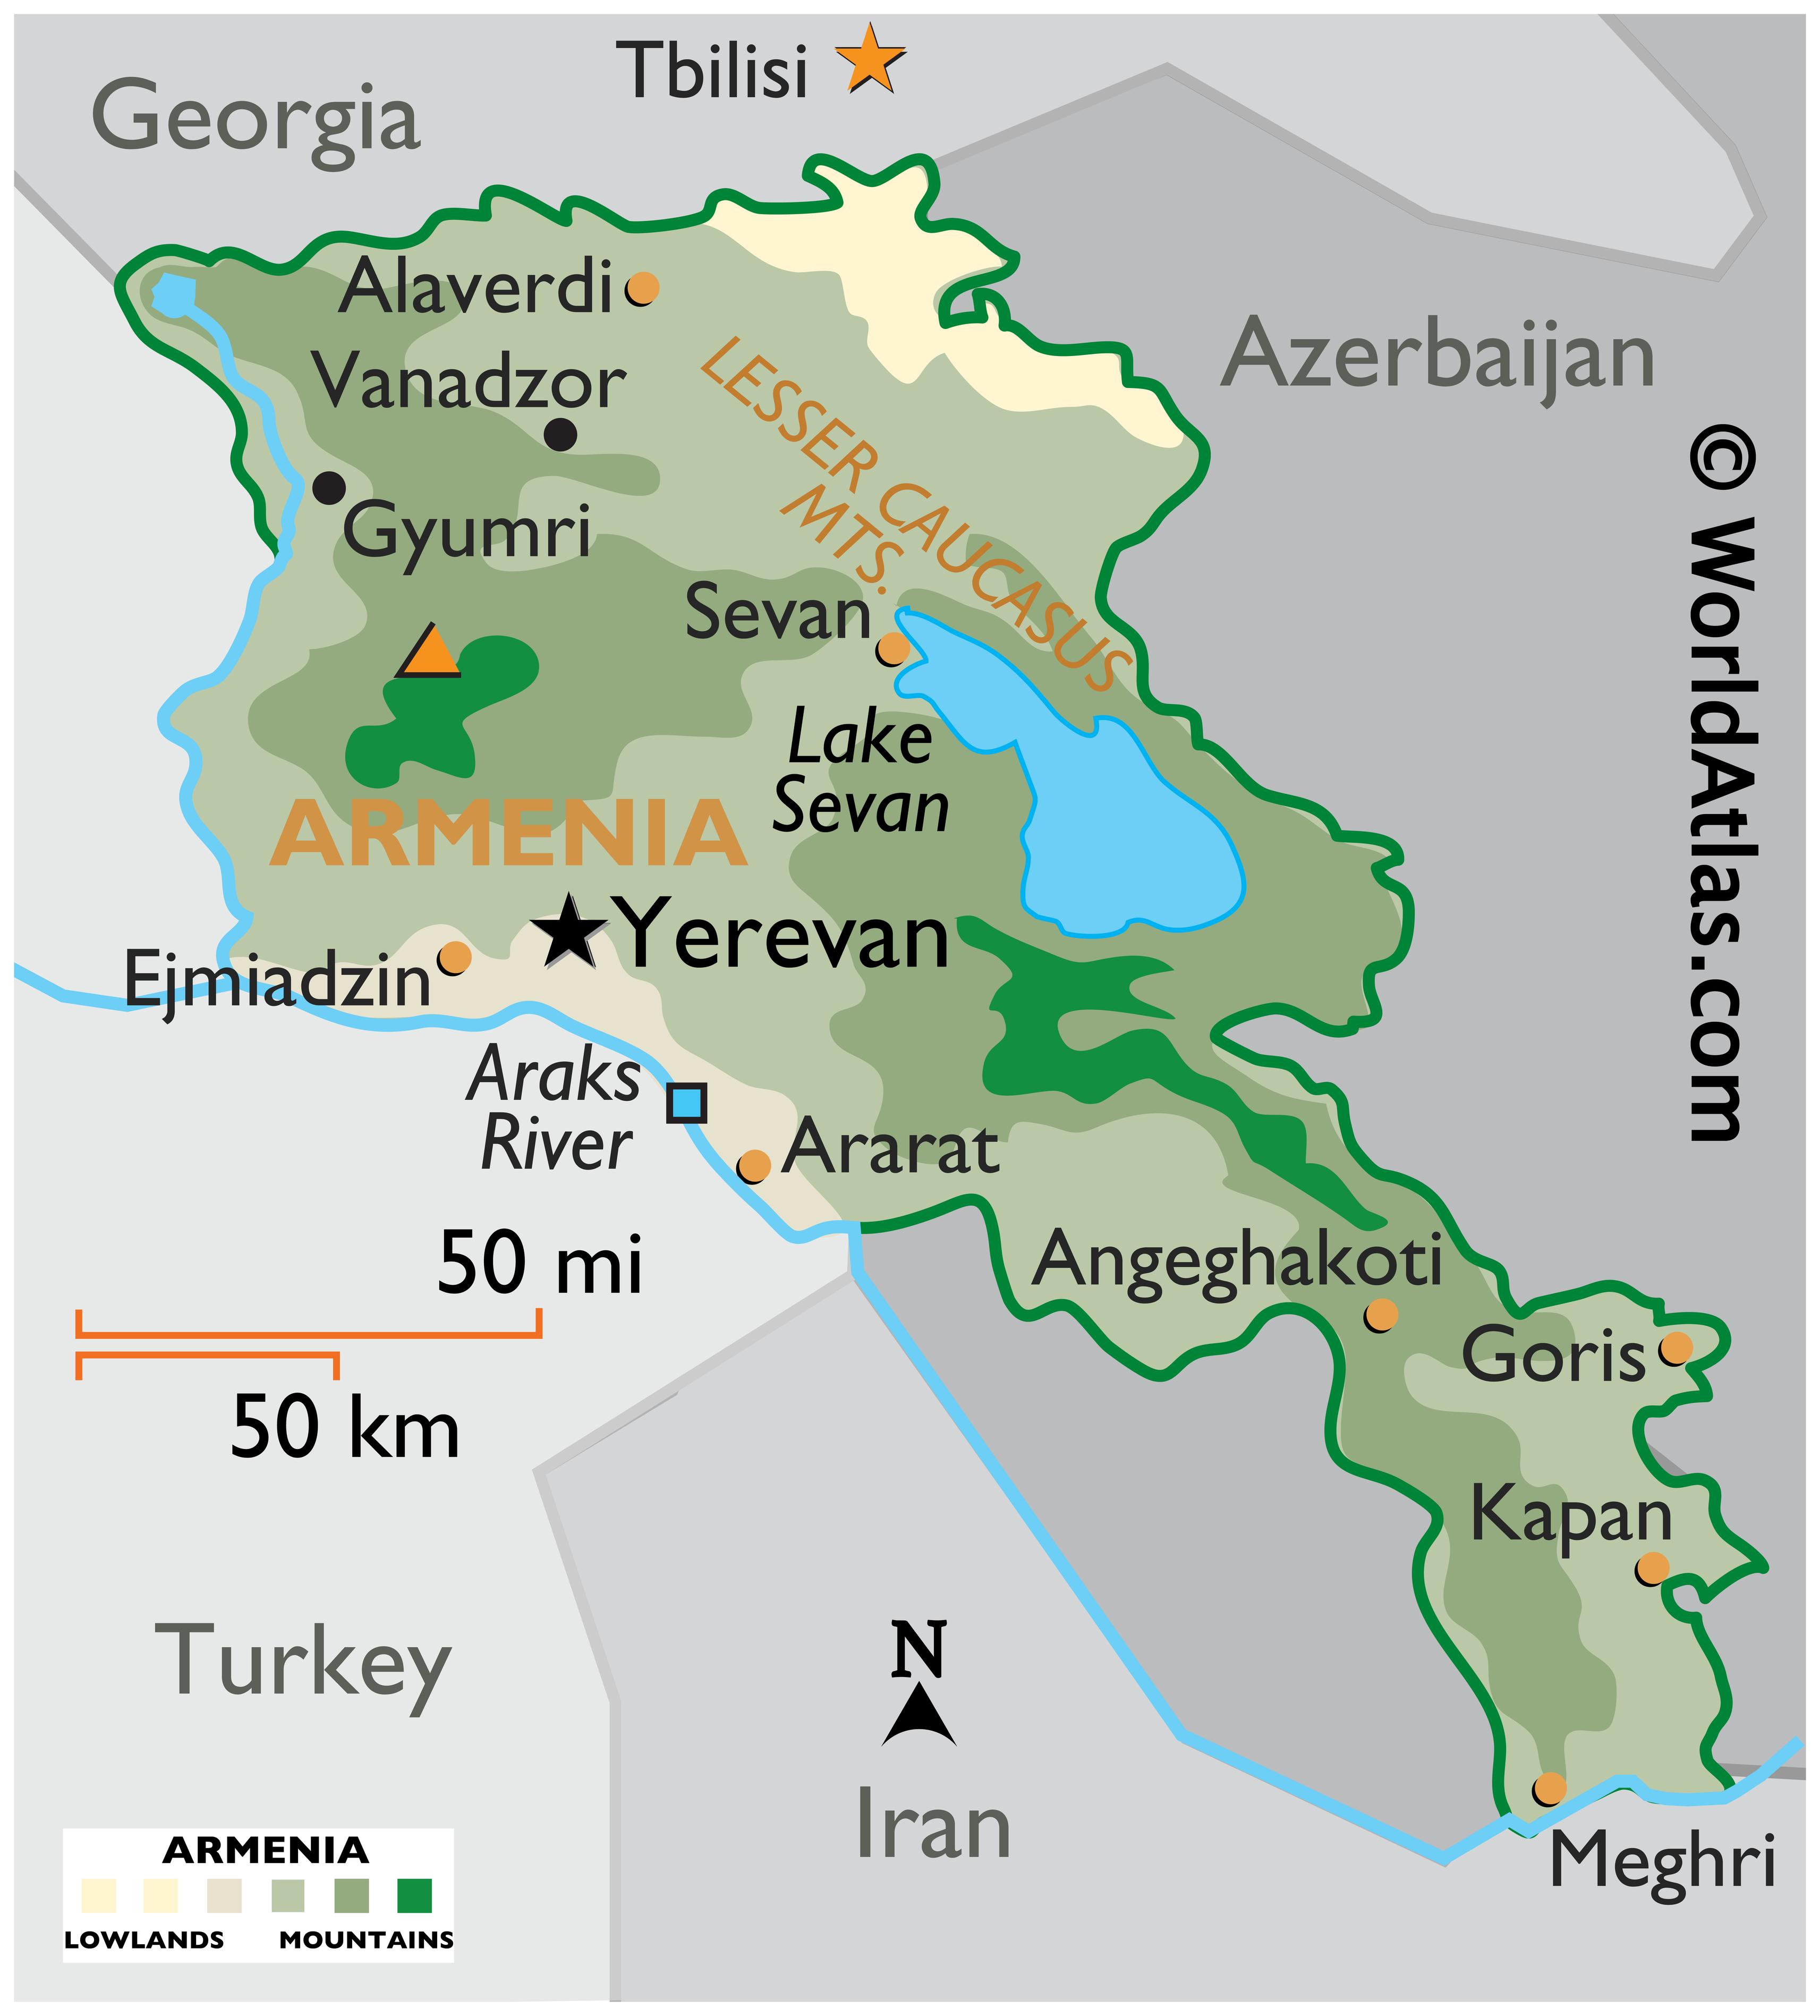 GeographyIQ - World Atlas - Middle East - Map of Armenia